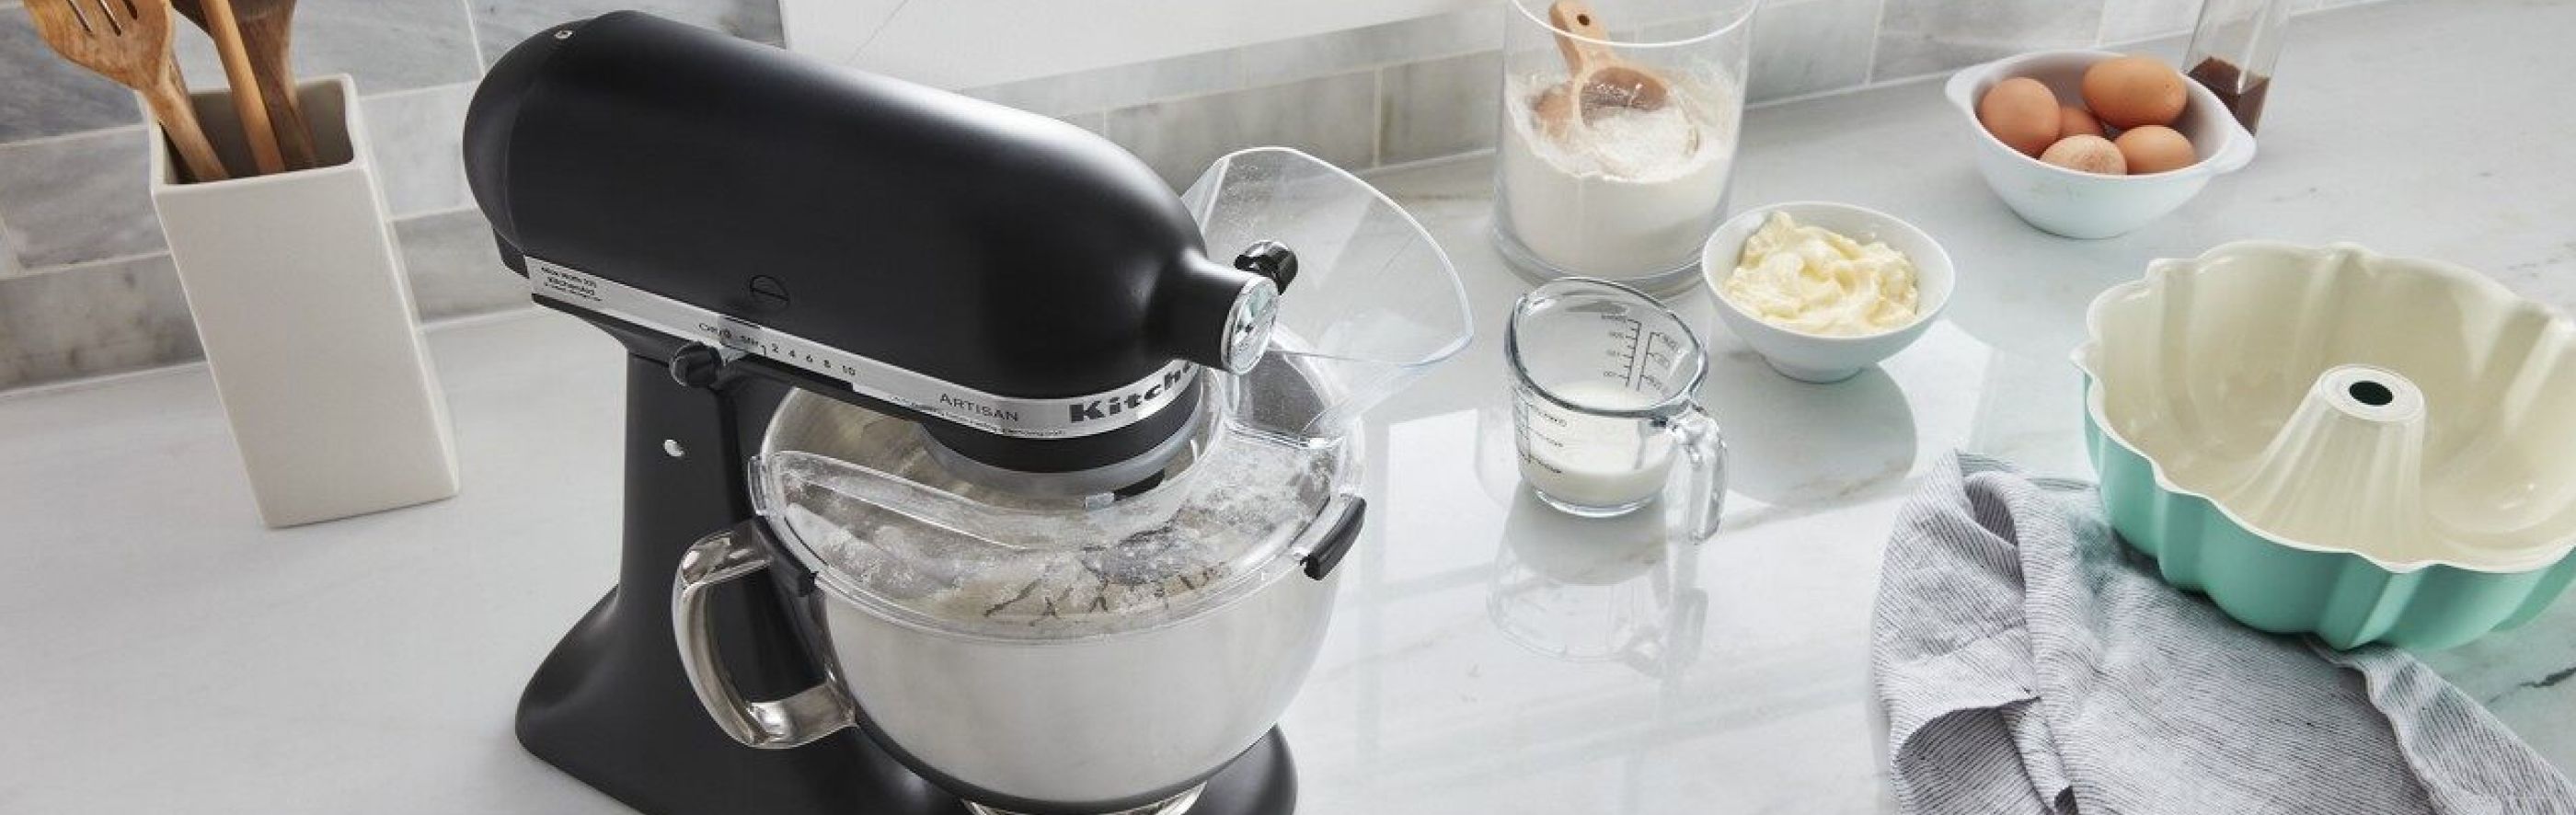 A KitchenAid® stand mixer surrounded by baking ingredients